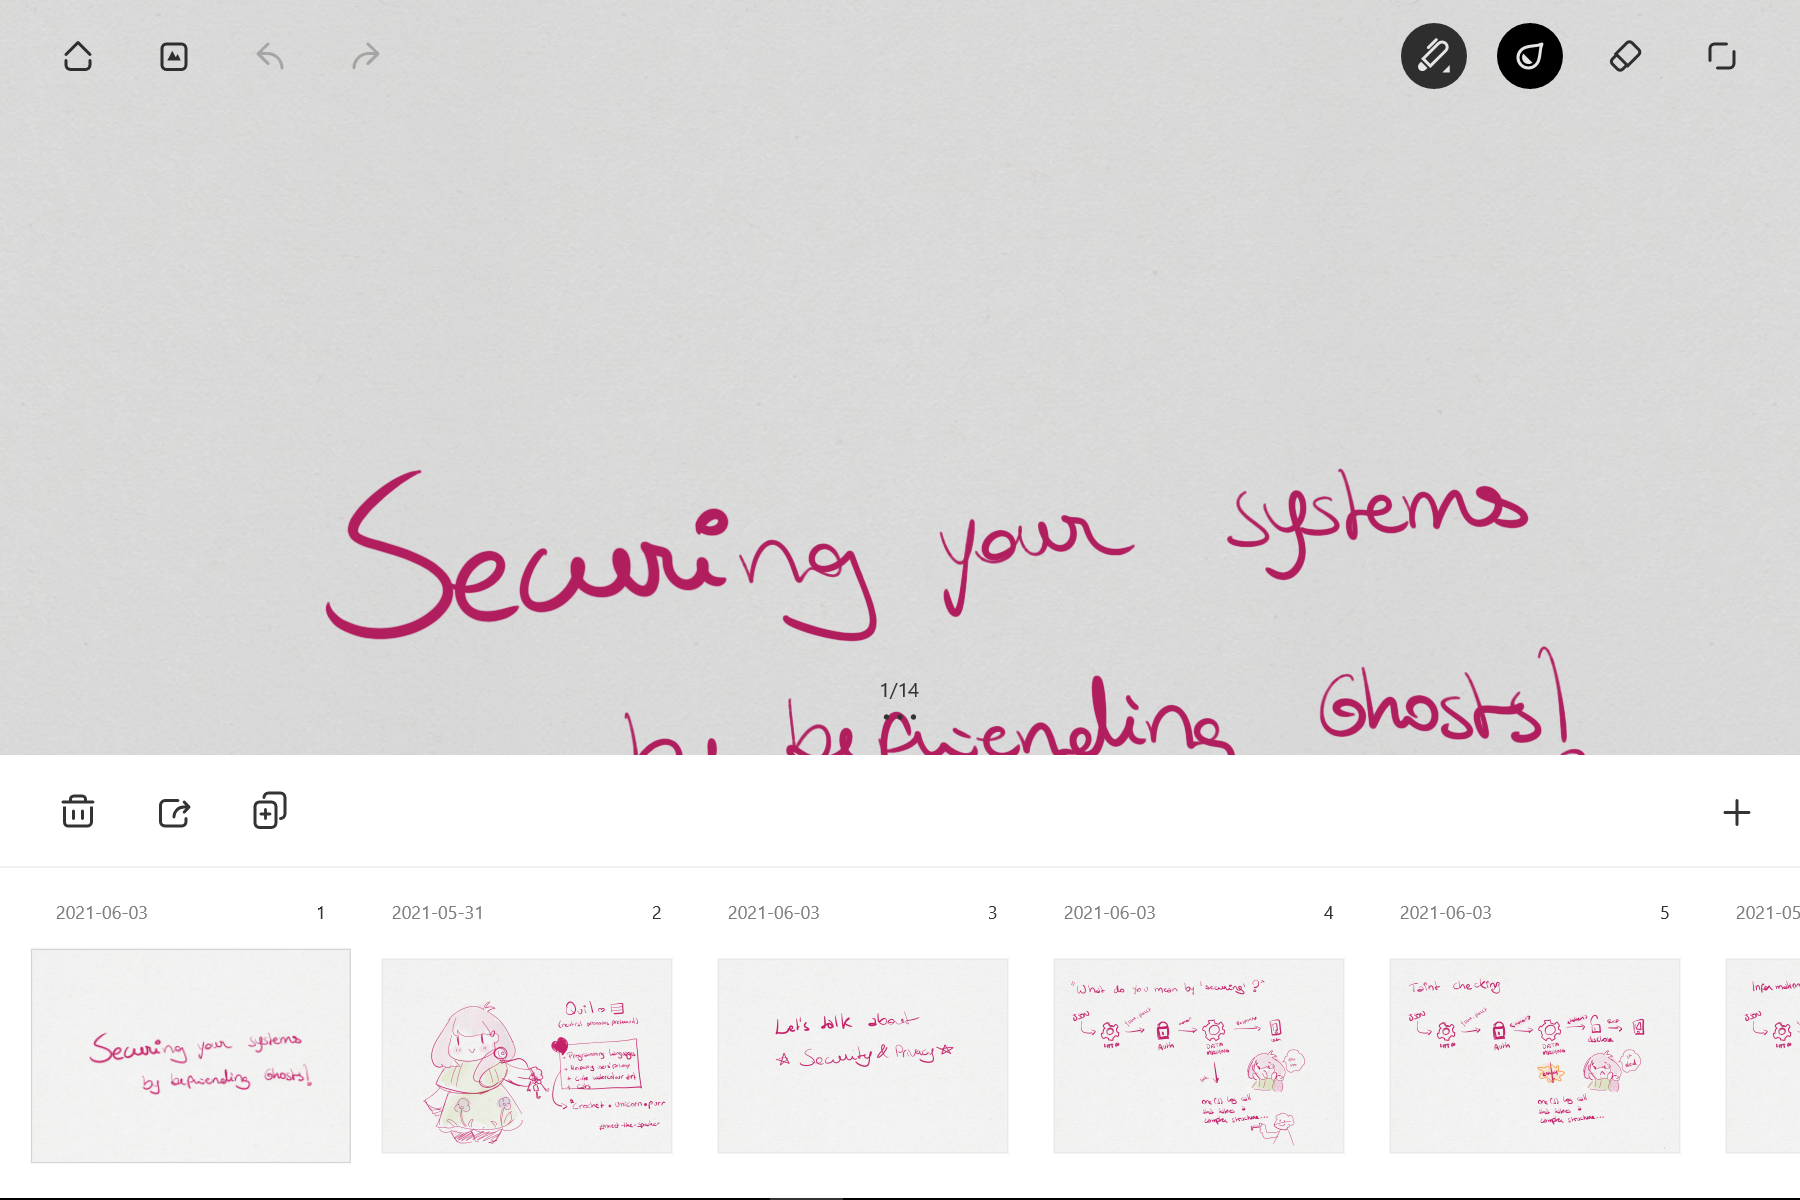 A screenshot of Bamboo Paper showing the title slide "Securing your systems by befriending ghosts", along with the first 5 pages of the storyboard